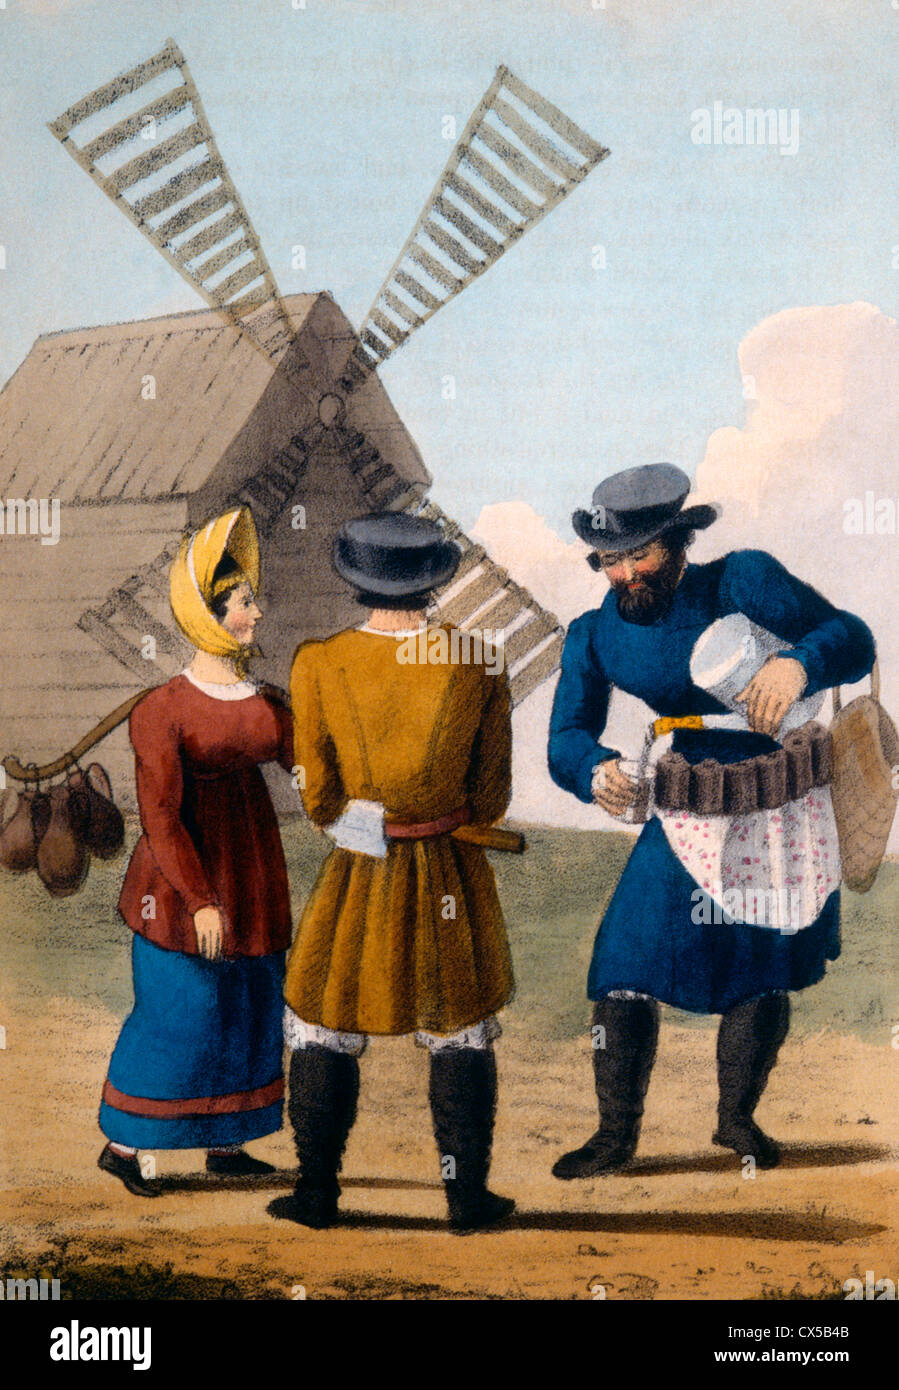 Izbitenchik a Carpenter and a Milkmaid, Hand-Colored Engraving From Robert Pinkerton's Russia, Circa 1833 Stock Photo